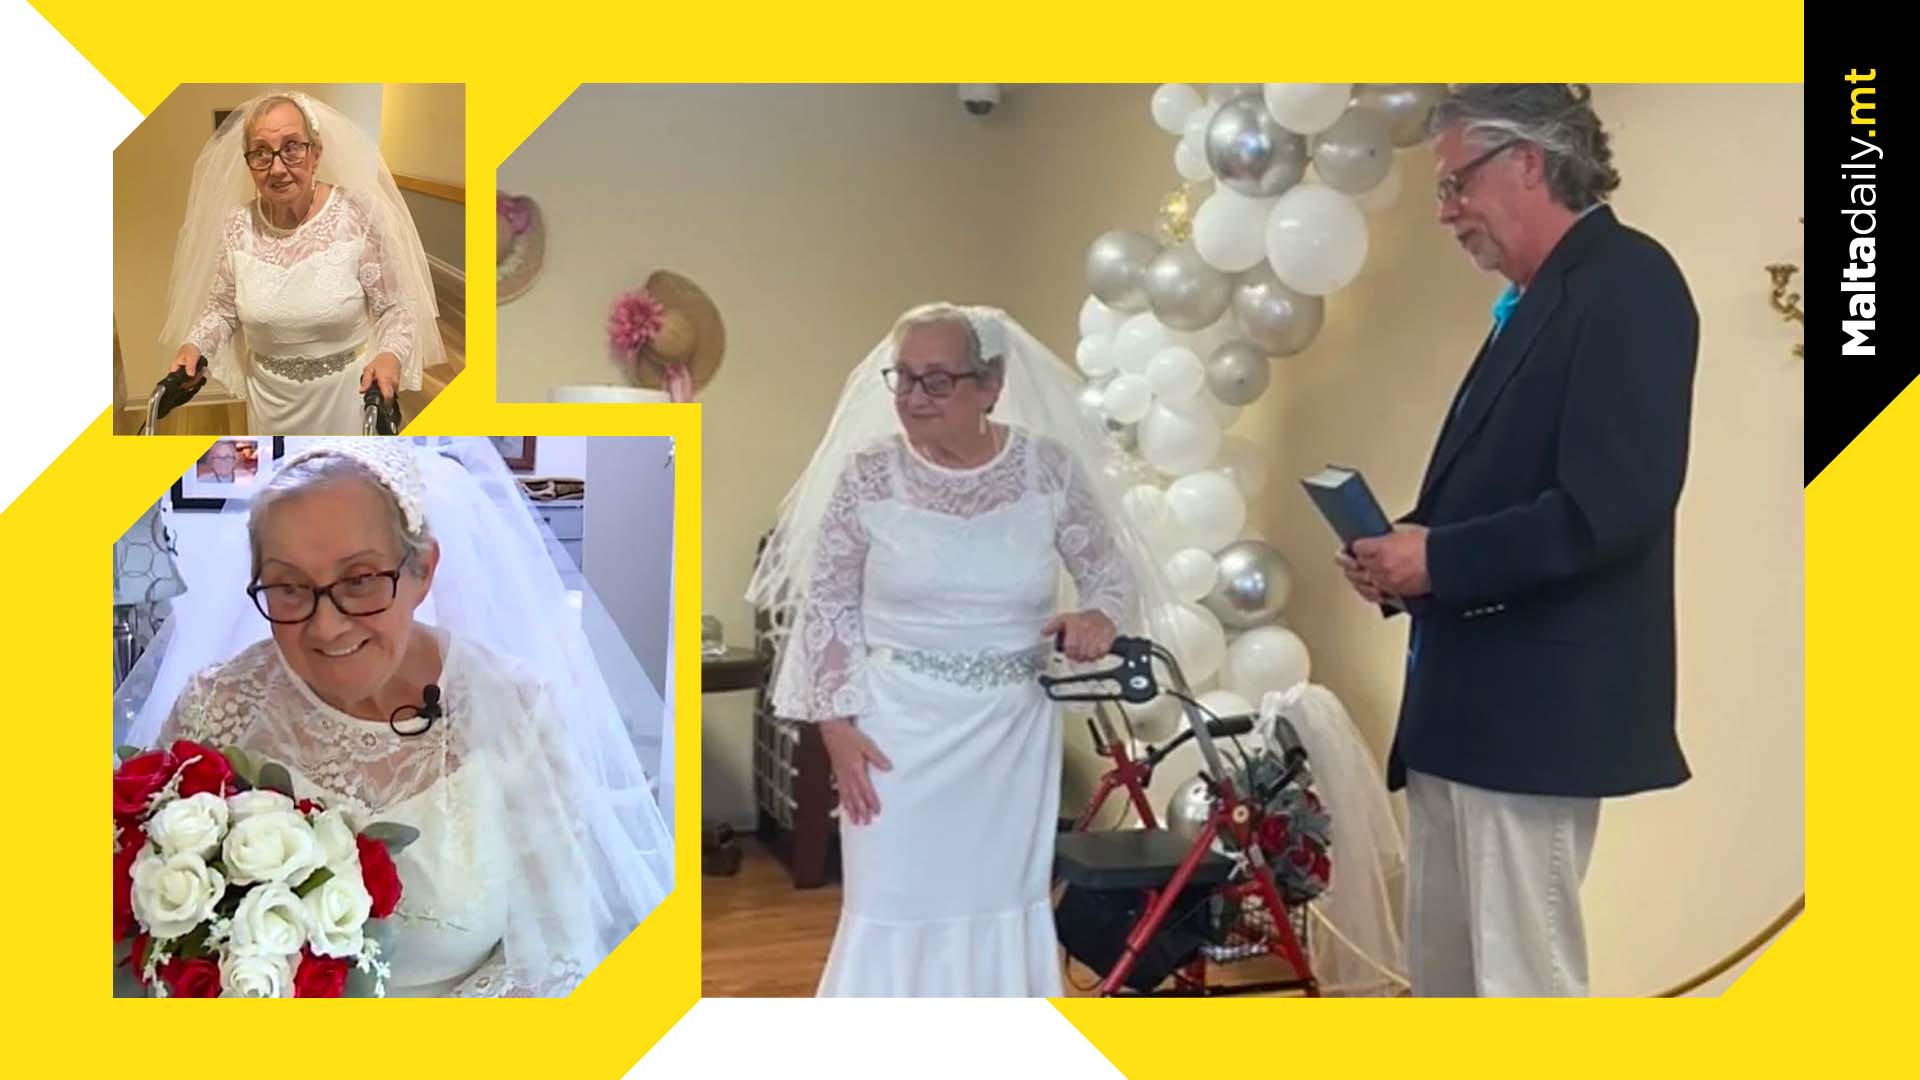 77 year old woman marries herself in wedding of her dreams